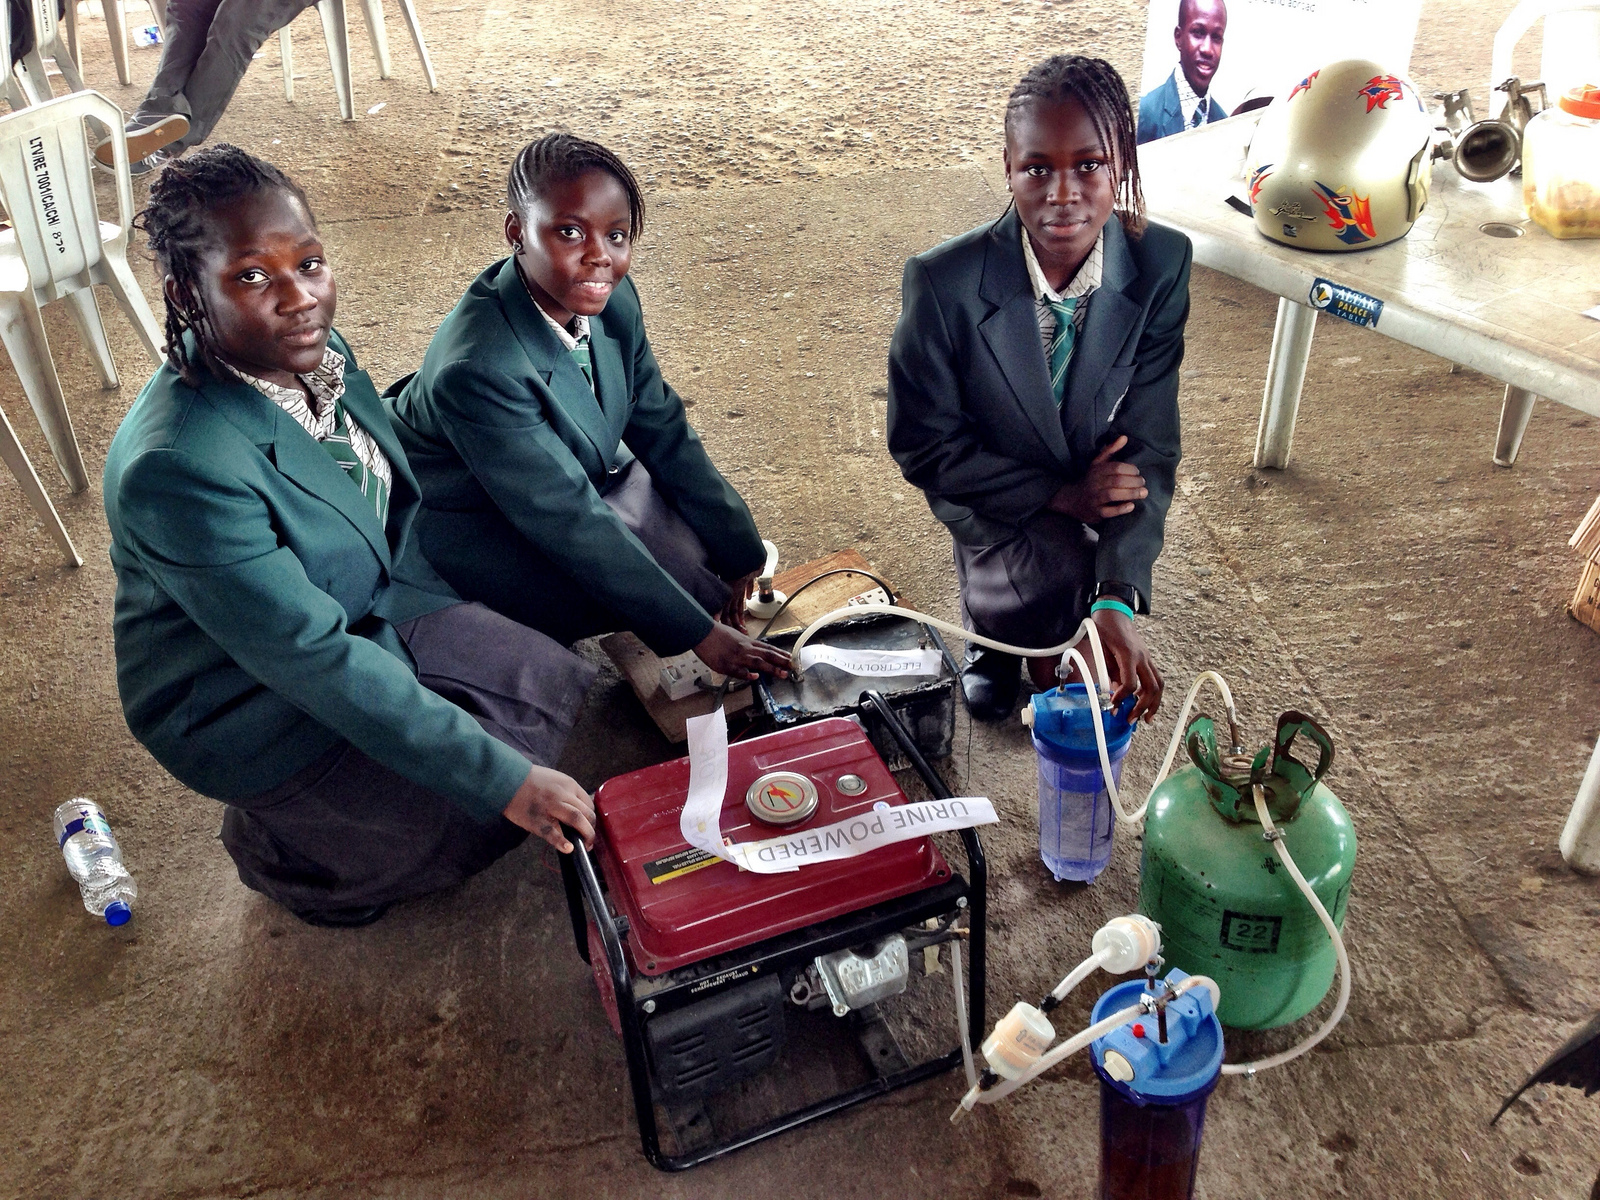 Four African girls have created a generator that produces Electricity for six hours using a single liter of urine as fuel